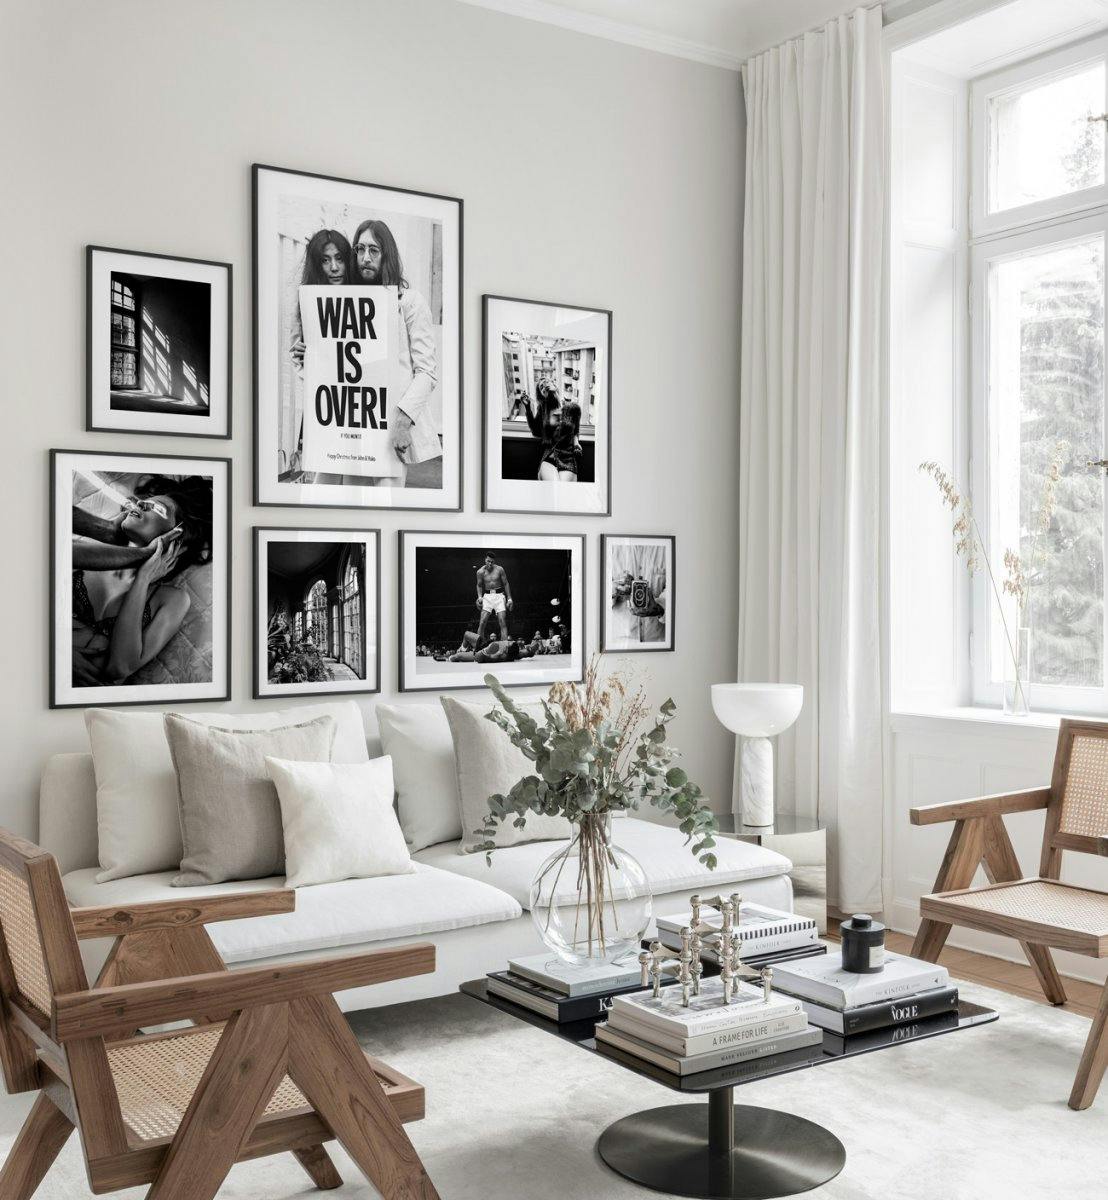 Gallery wall in black and white with iconic photo posters and black frames